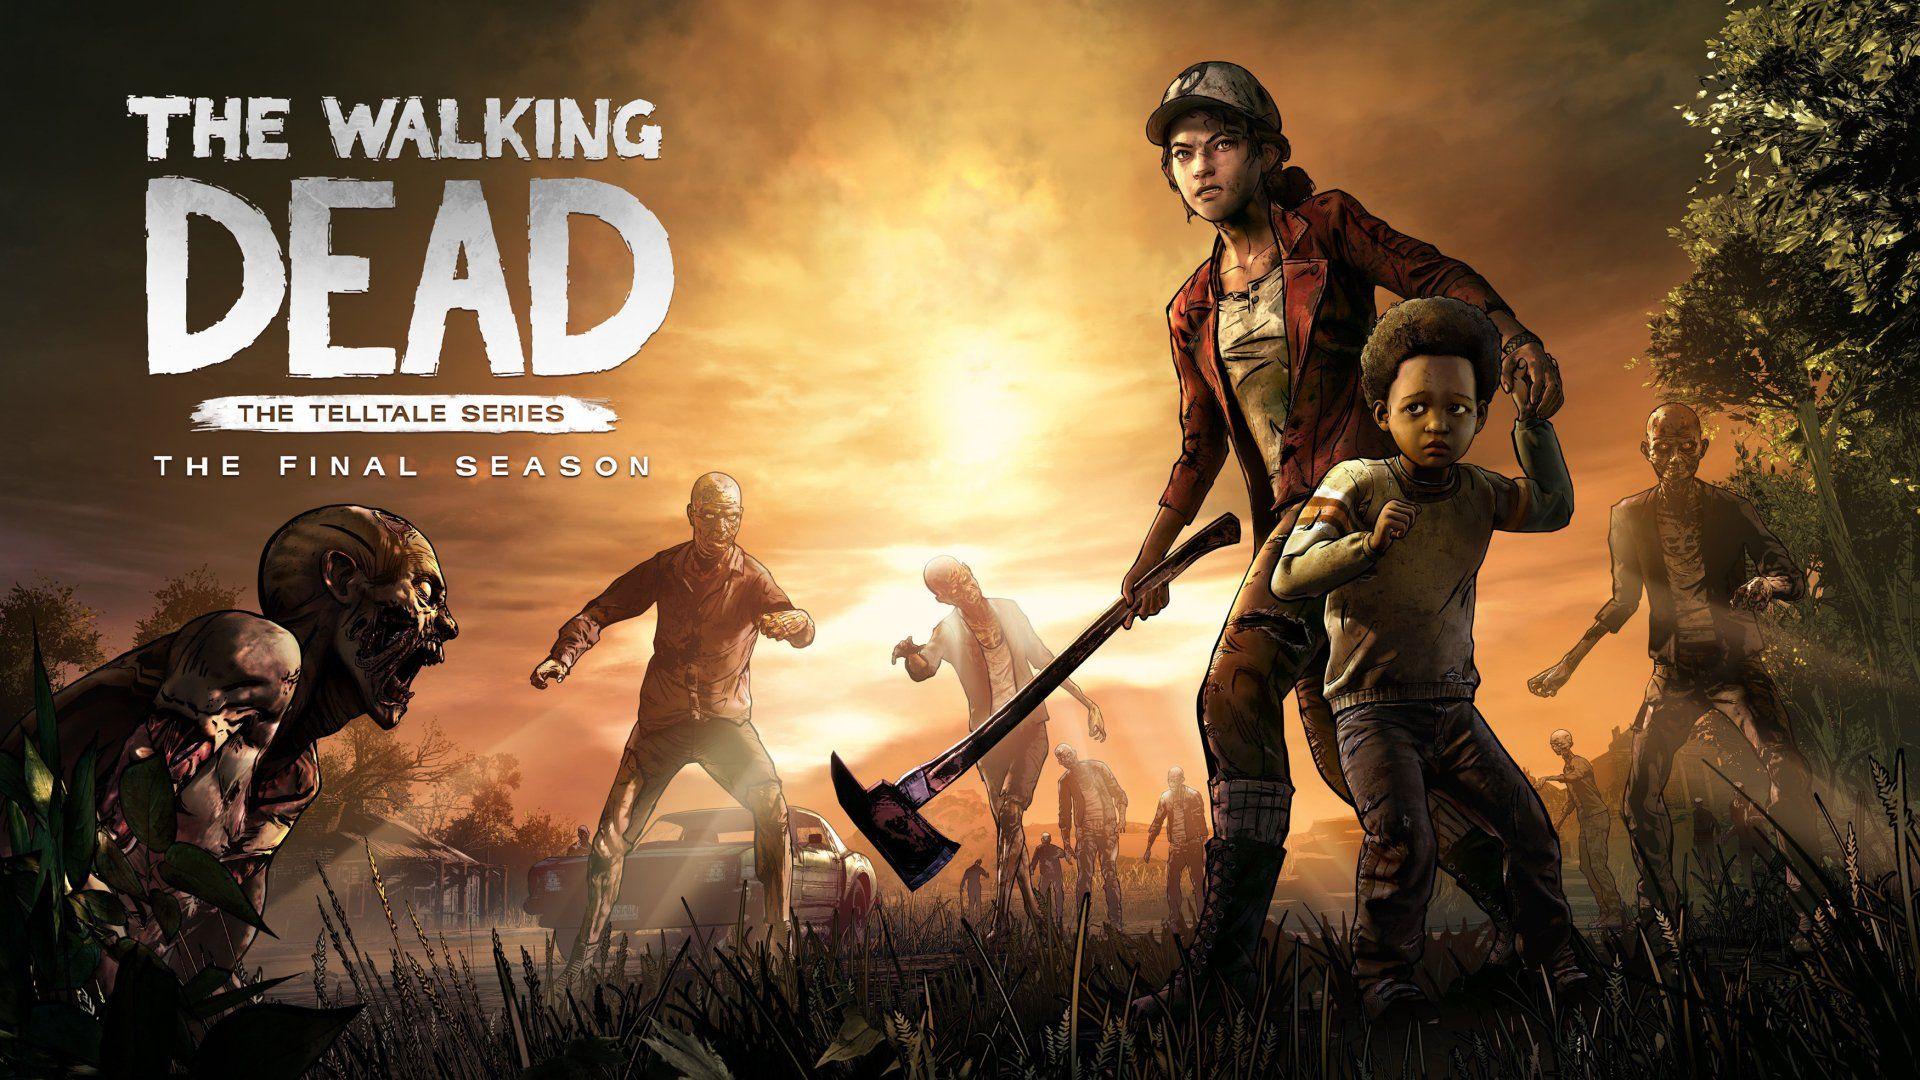 the walking dead game download free full